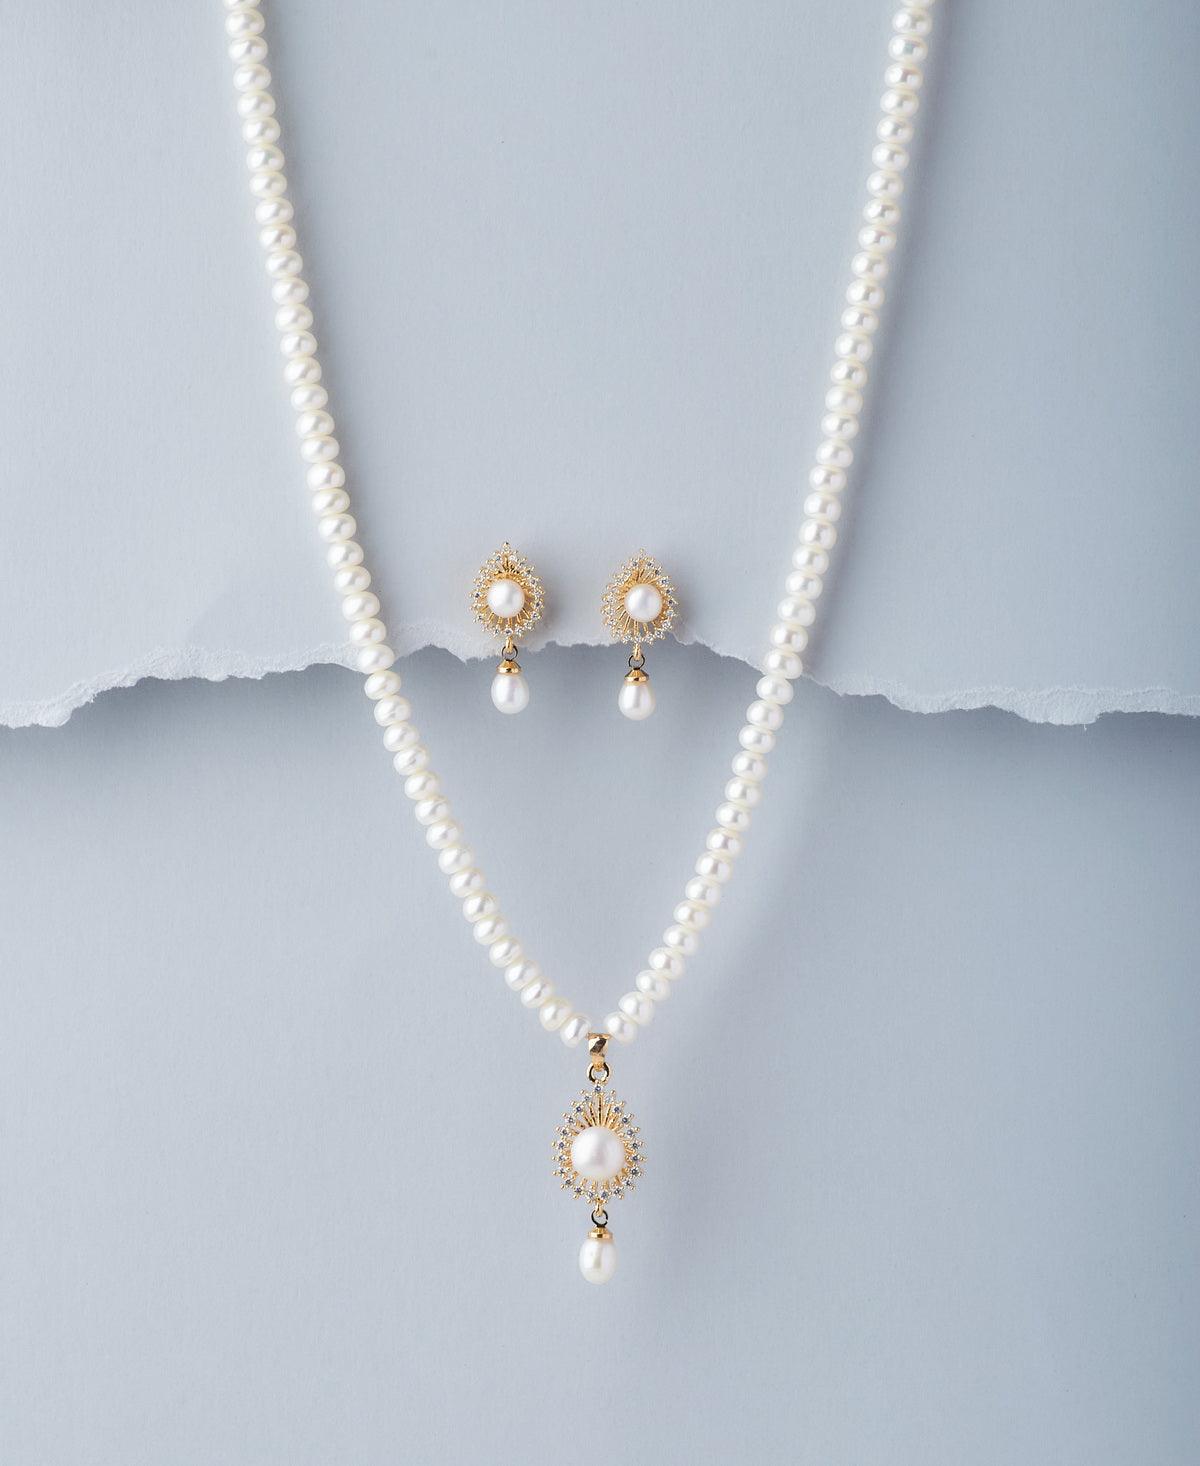 Traditional Pearl Necklace Set - Chandrani Pearls